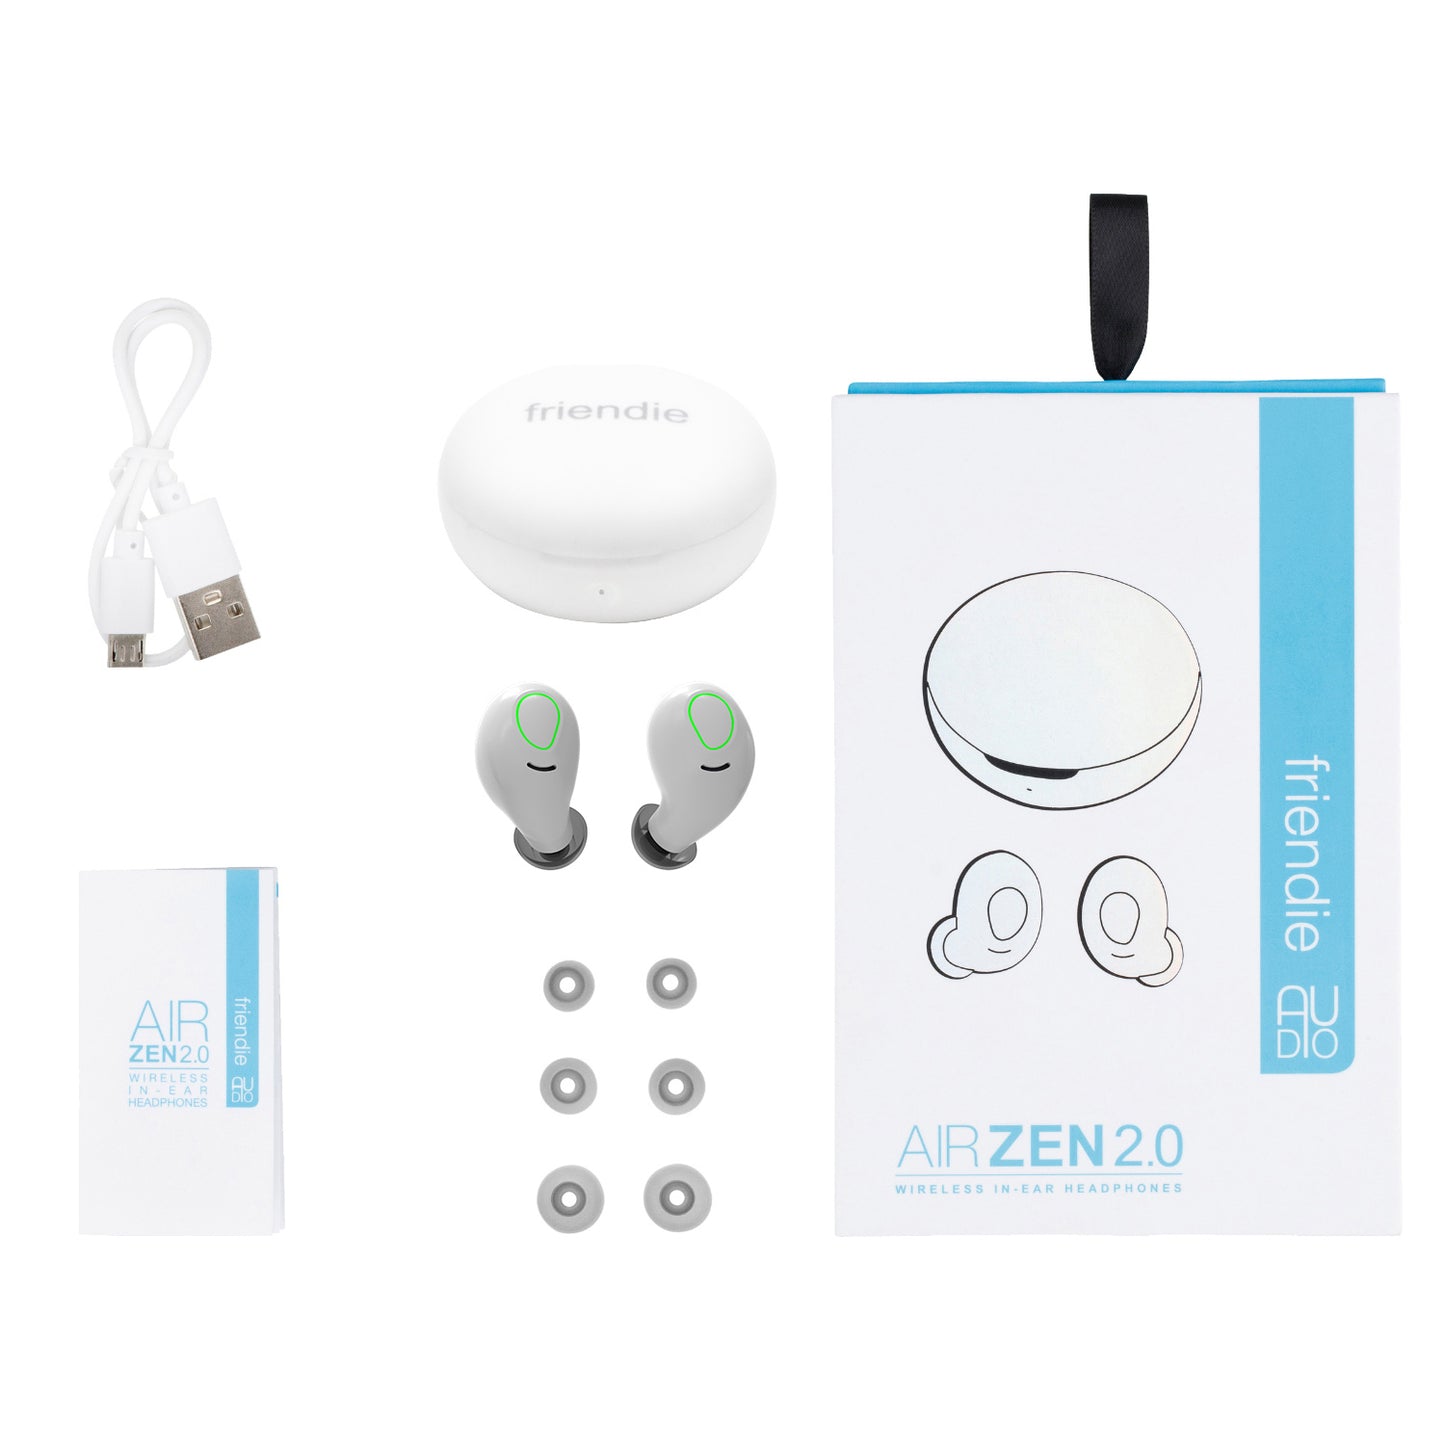 AIR ZEN 2.0 Pearl White + ChargePad, In Ear Headphones, Friendie Audio Pty Ltd, Friendie Audio Pty Ltd